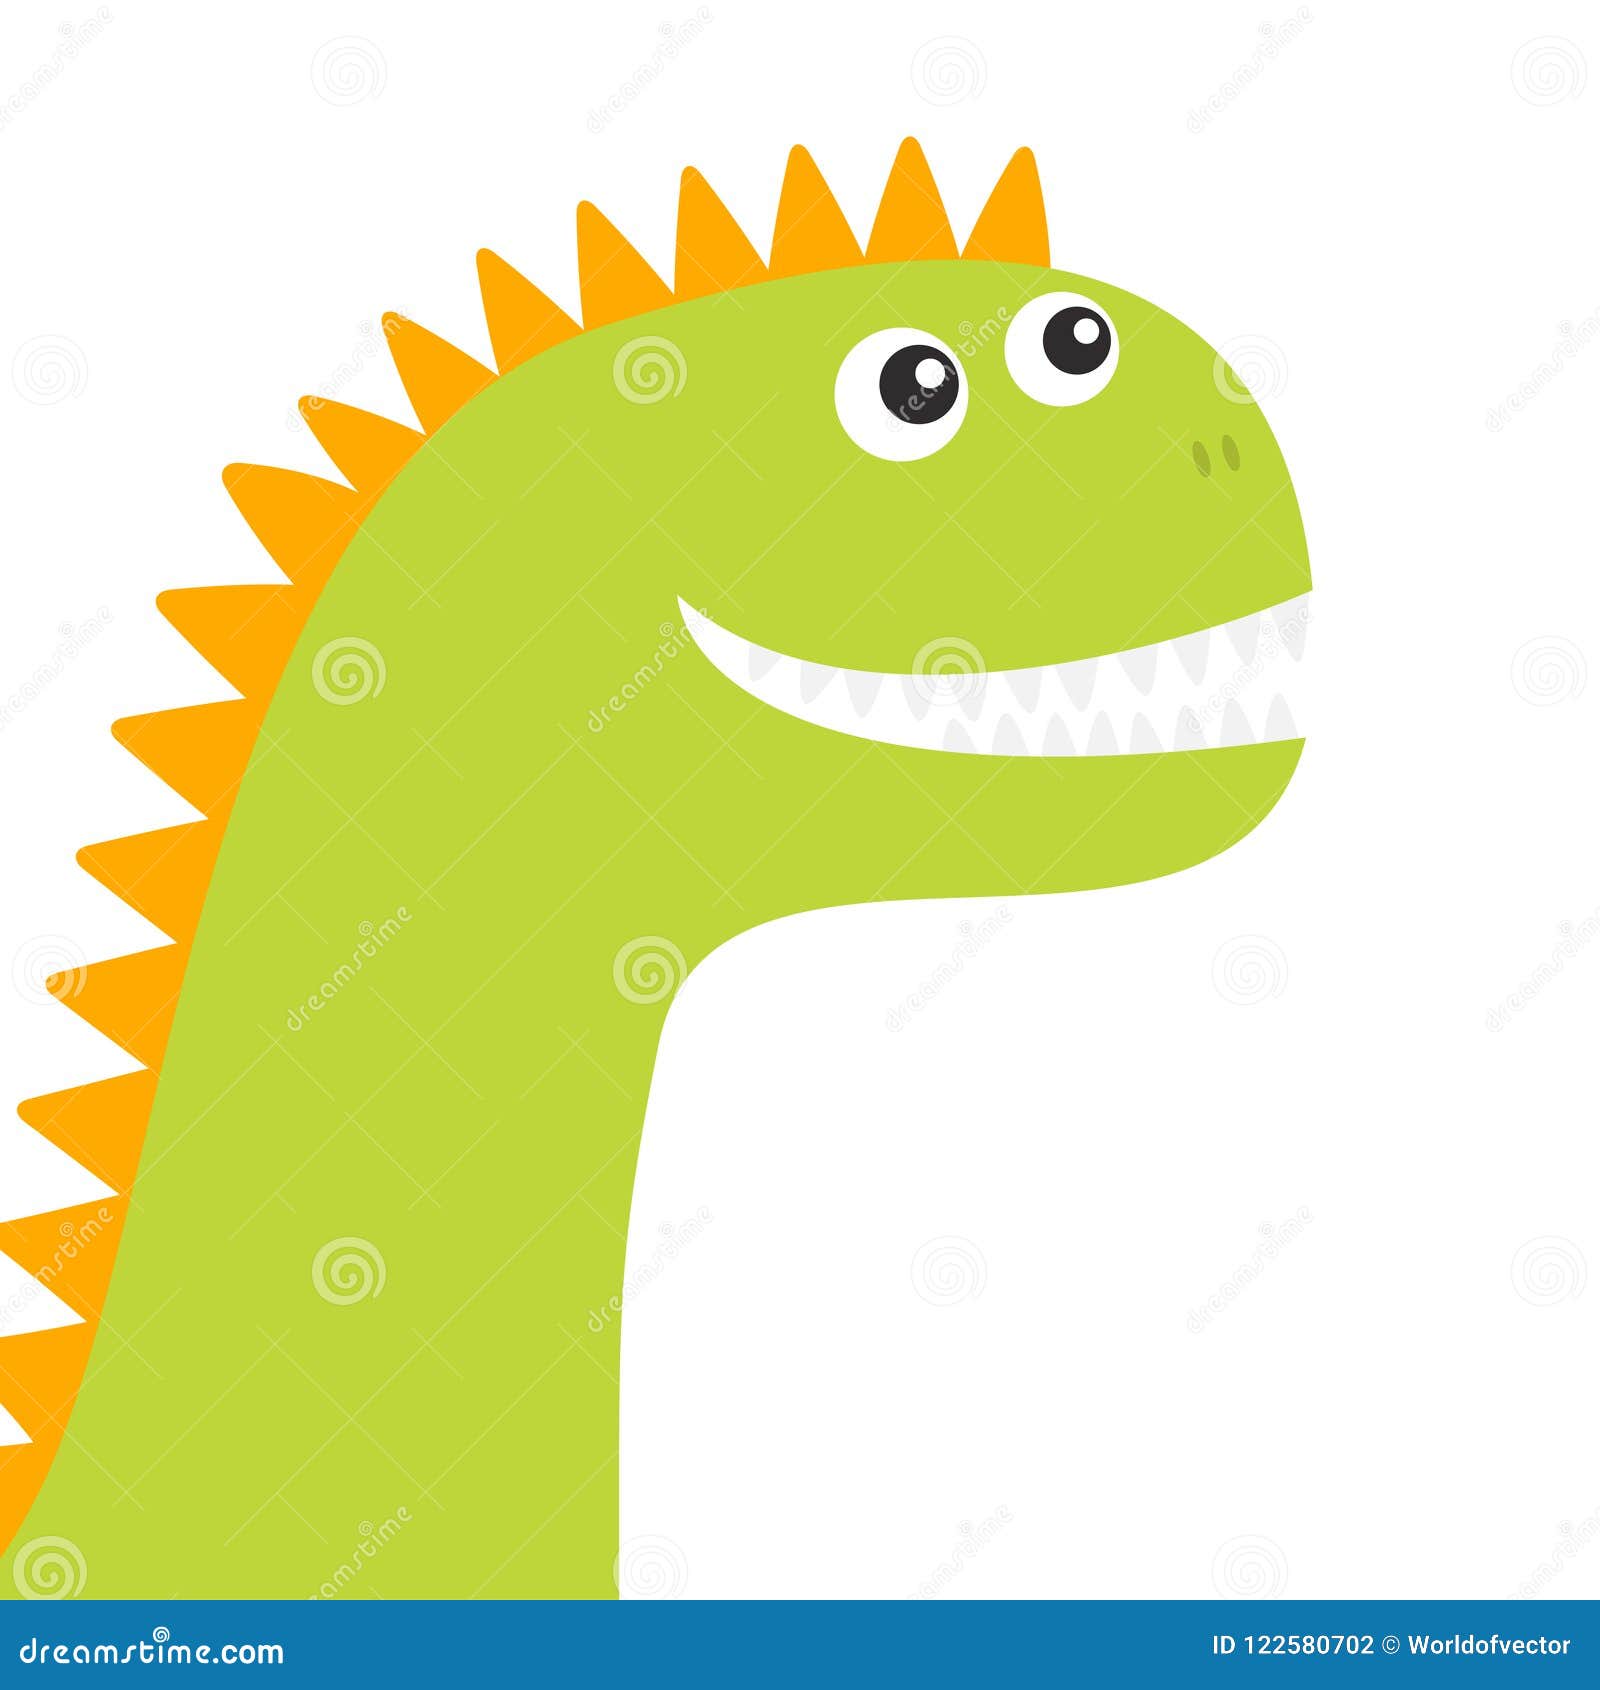 Dinosaur Face. Cute Cartoon Funny Dino Baby Character. Flat Design. Green  and Orange Color. White Background Stock Vector - Illustration of cartoon,  cute: 122580702